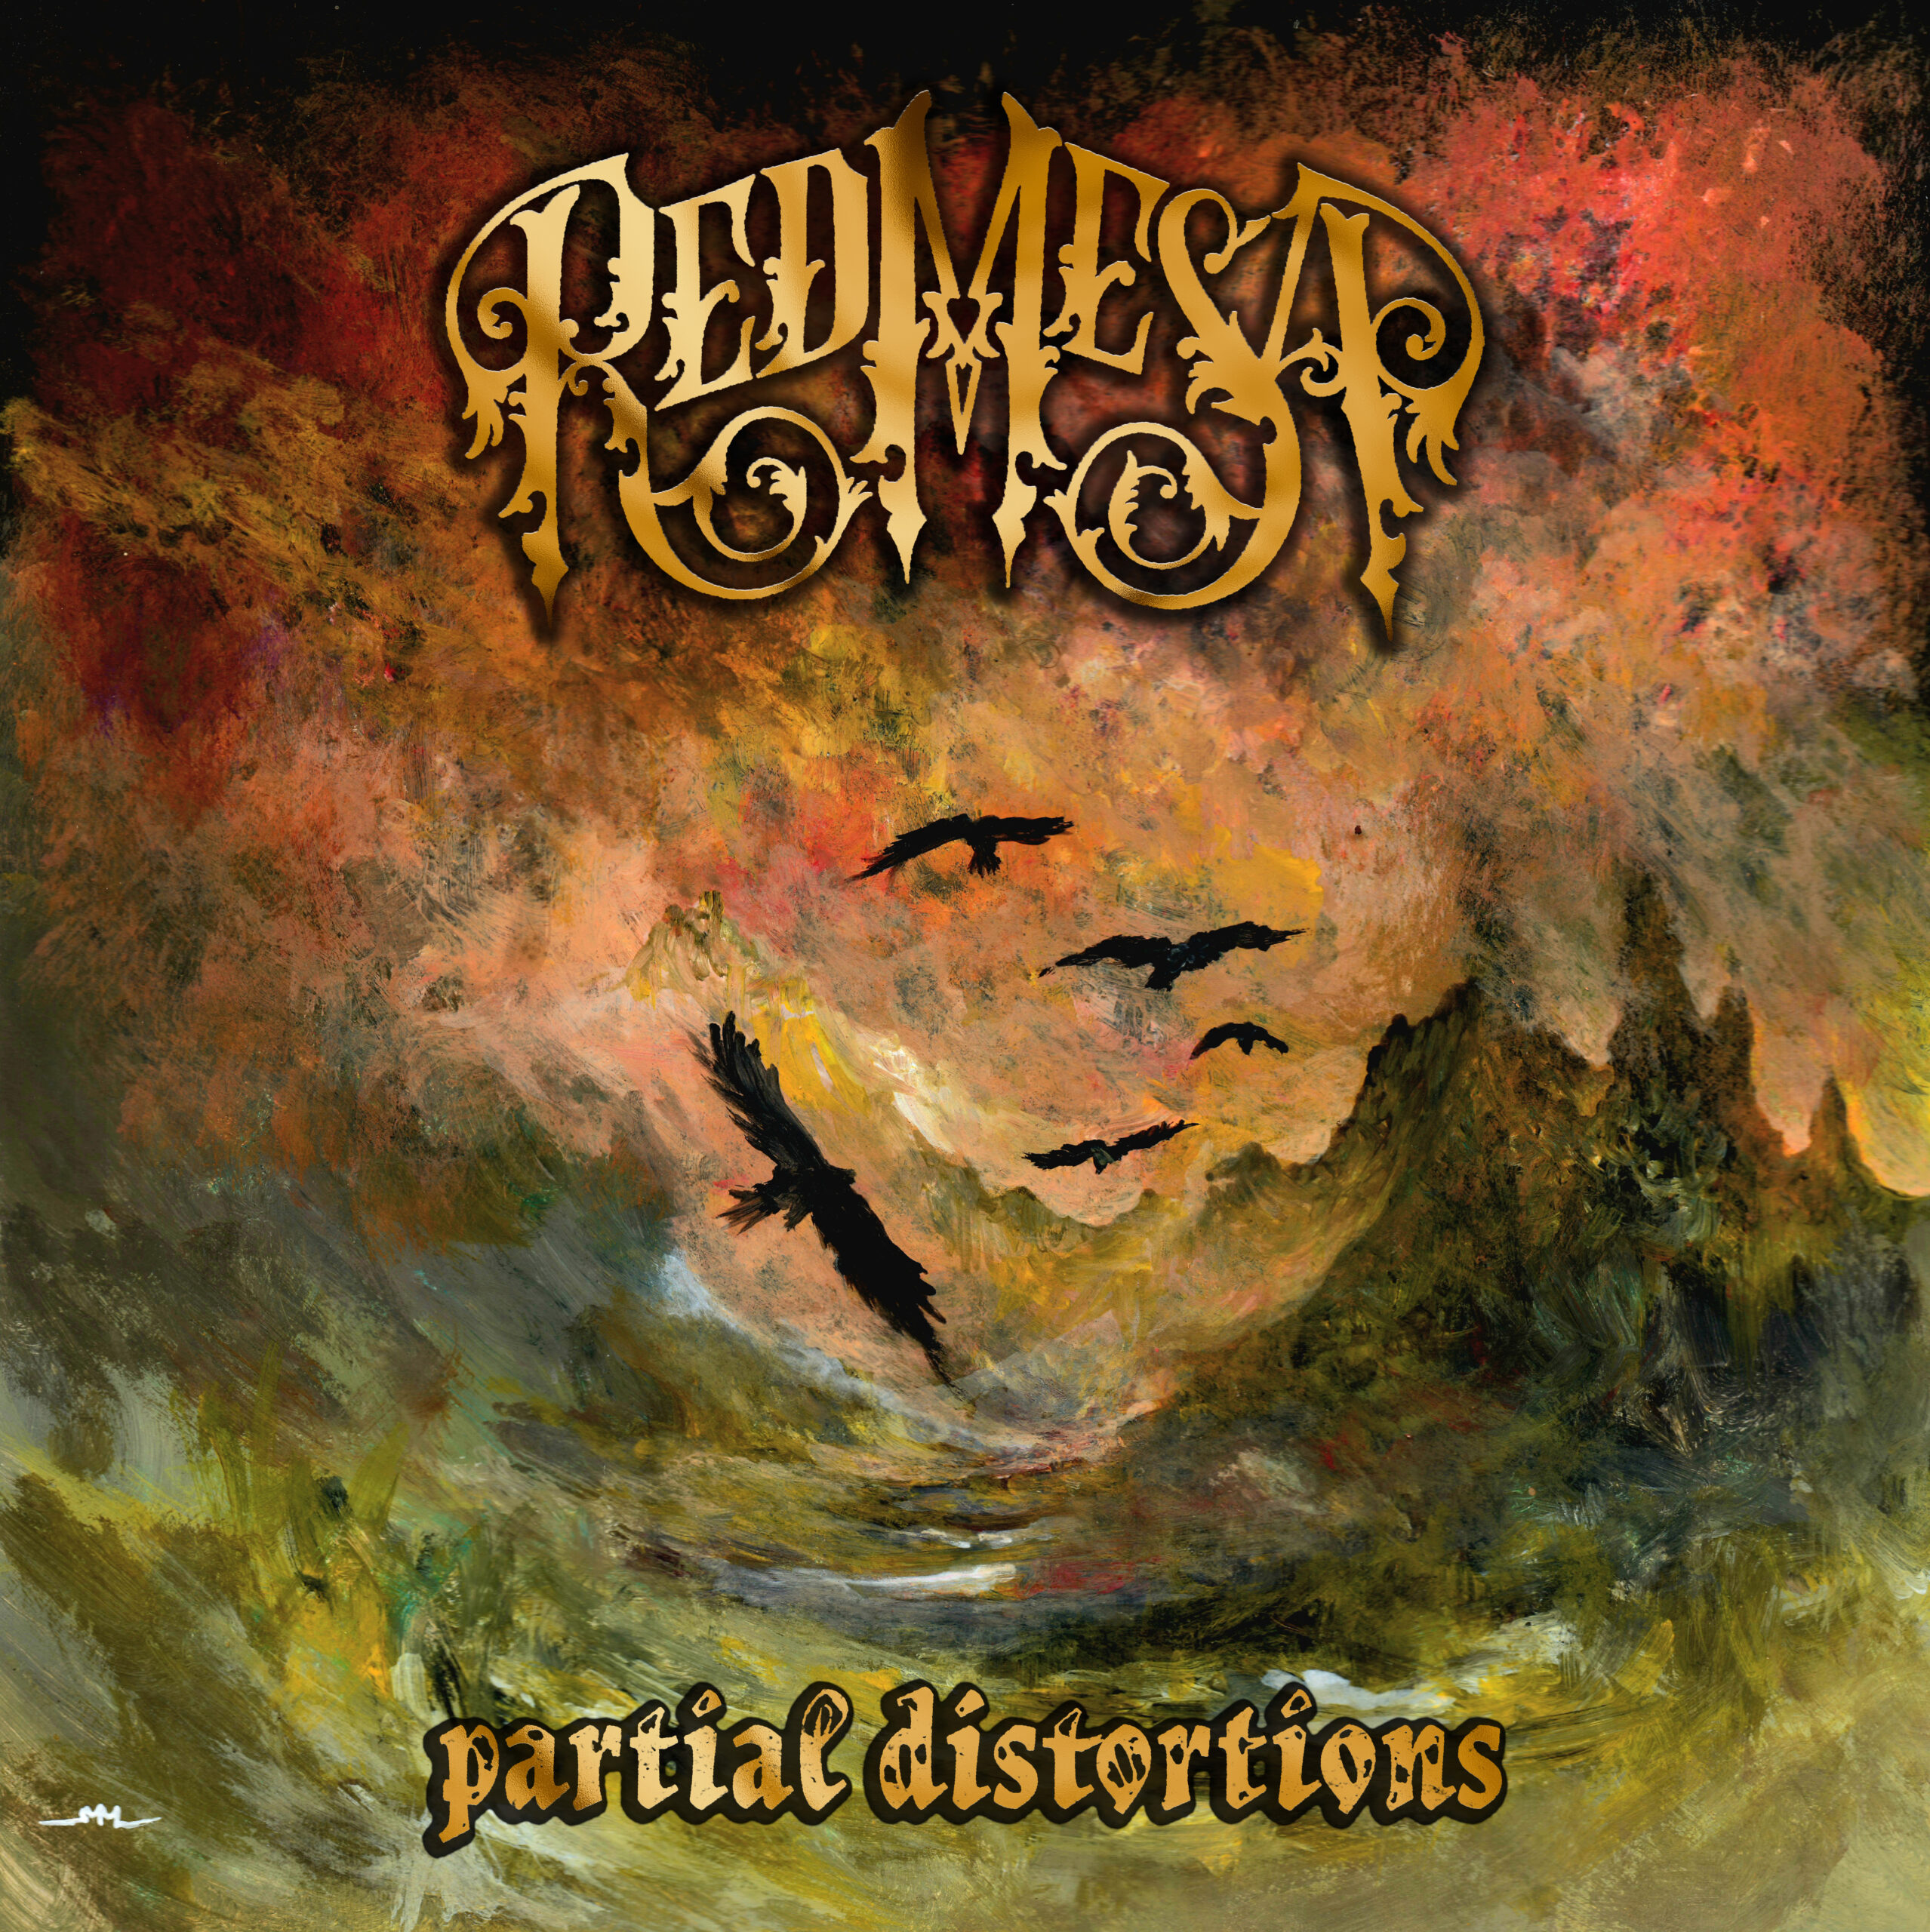 GZ054 Red Mesa - Partial Distortions Desert Records grazil Records